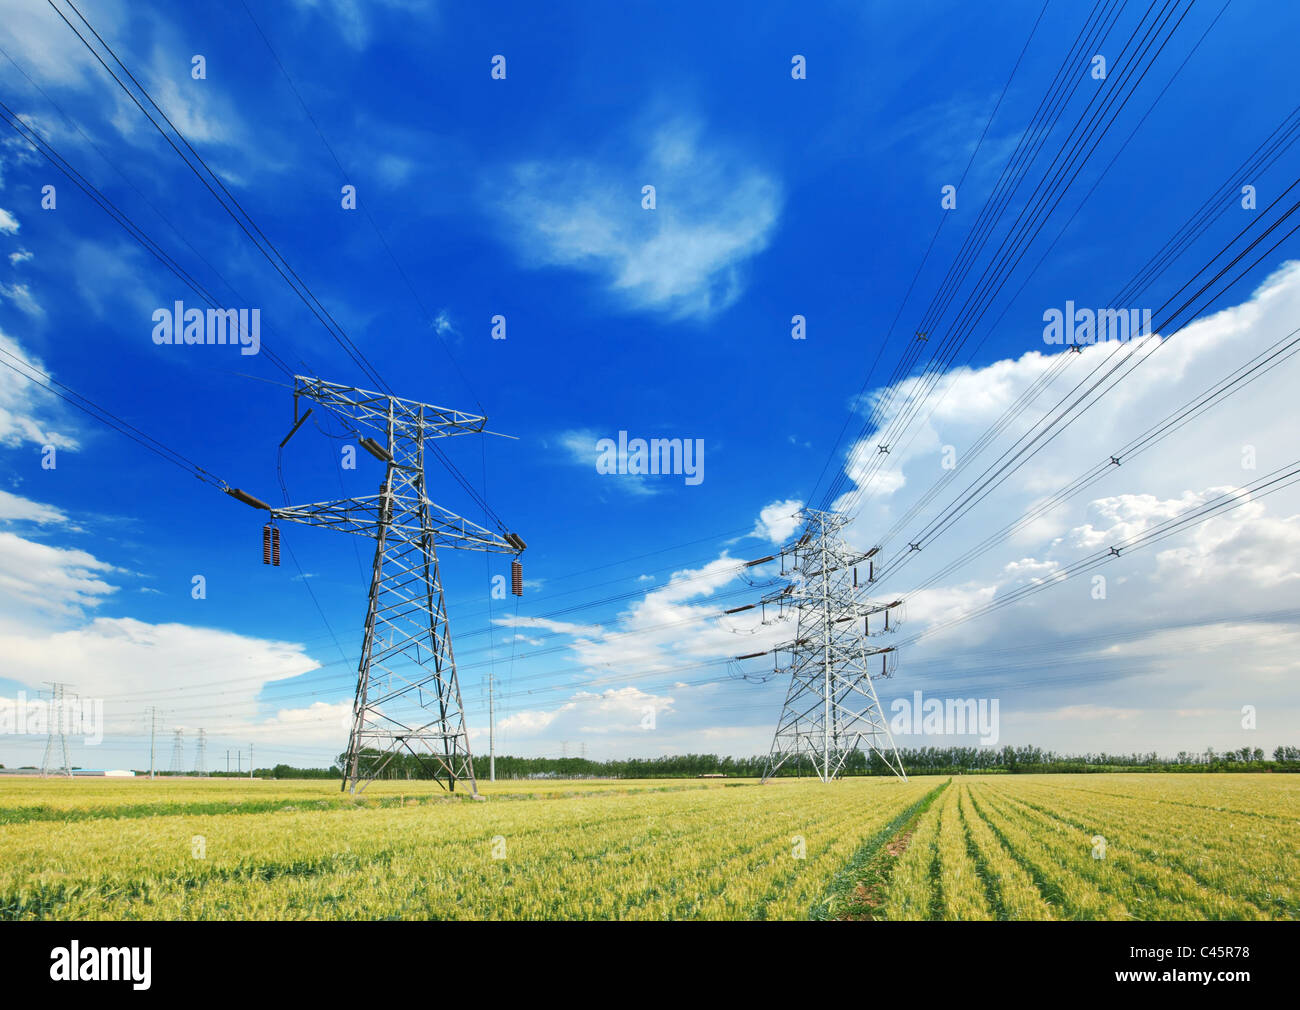 High voltage power lines above wheat field Stock Photo